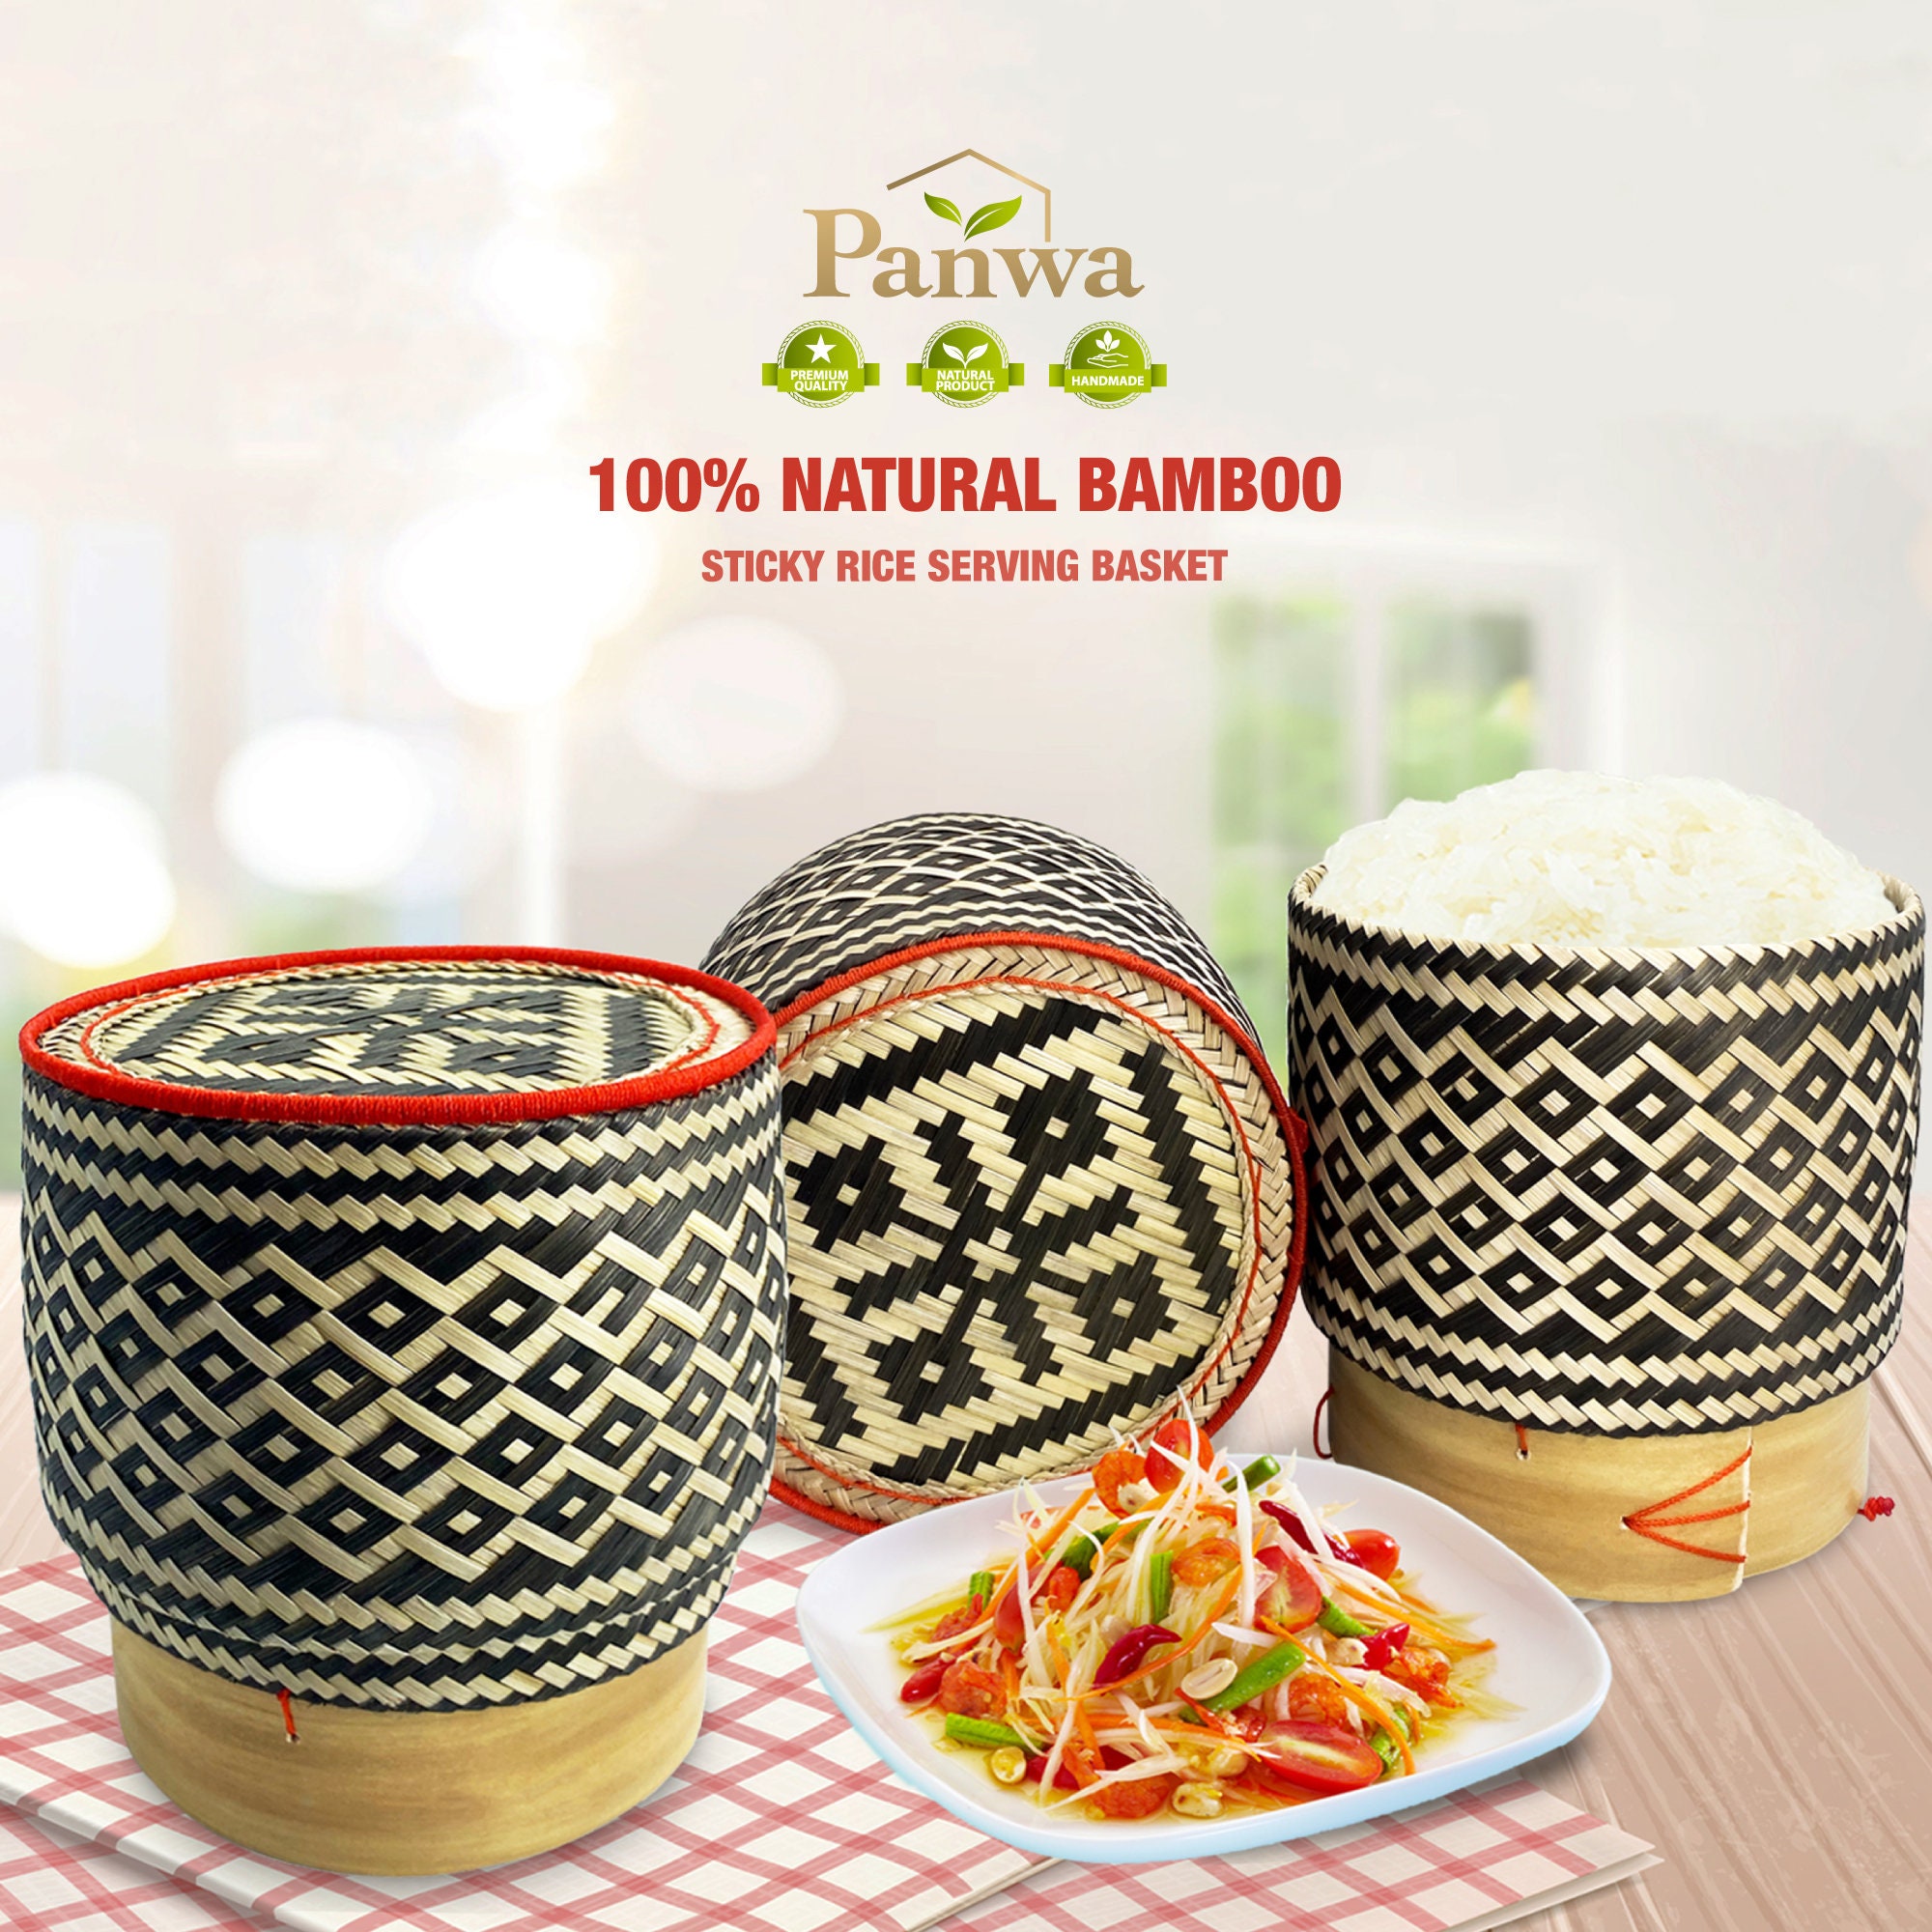 PANWA Traditional Sticky Rice Cooking Steamer Basket Wicker Lid Handcrafted “Universal Fit for All Large” Wing and Round Baskets